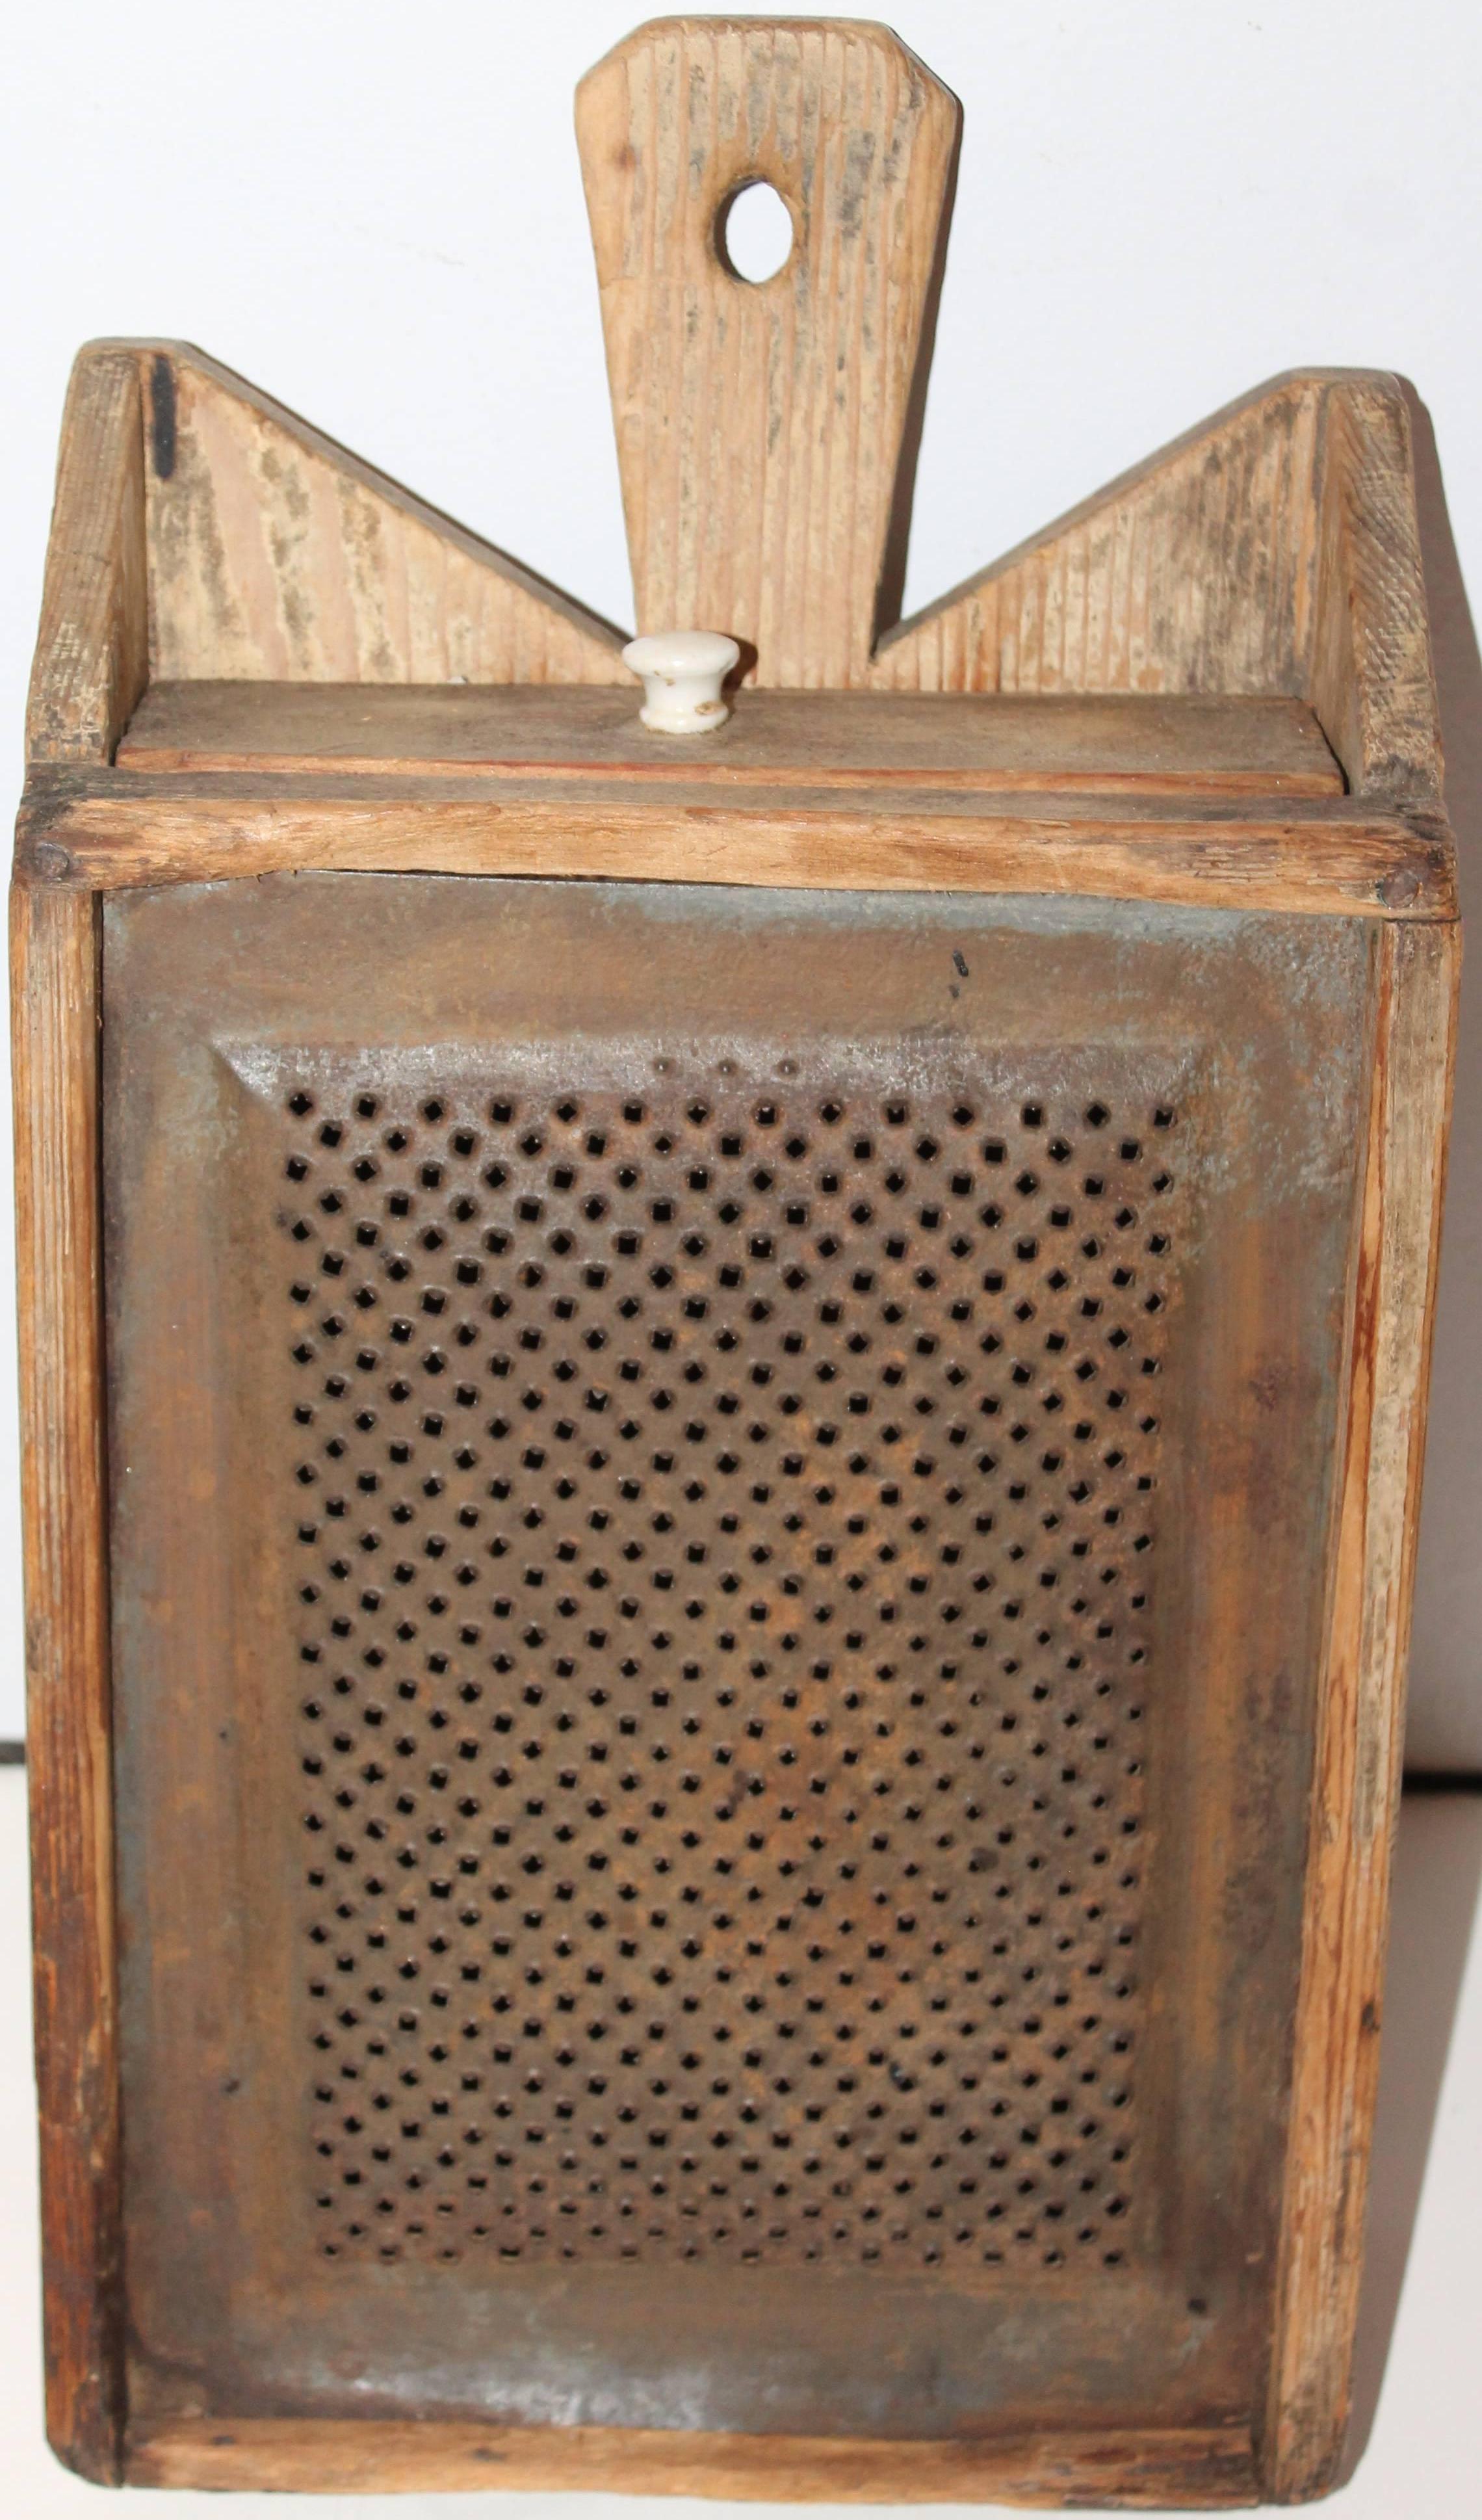 This early all original cream painted grater wall box. This early painted table top or wall-mounted kitchen work box is in great as found condition. The box is all square nail construction and has a amazing undisturbed surface. The base looks like a